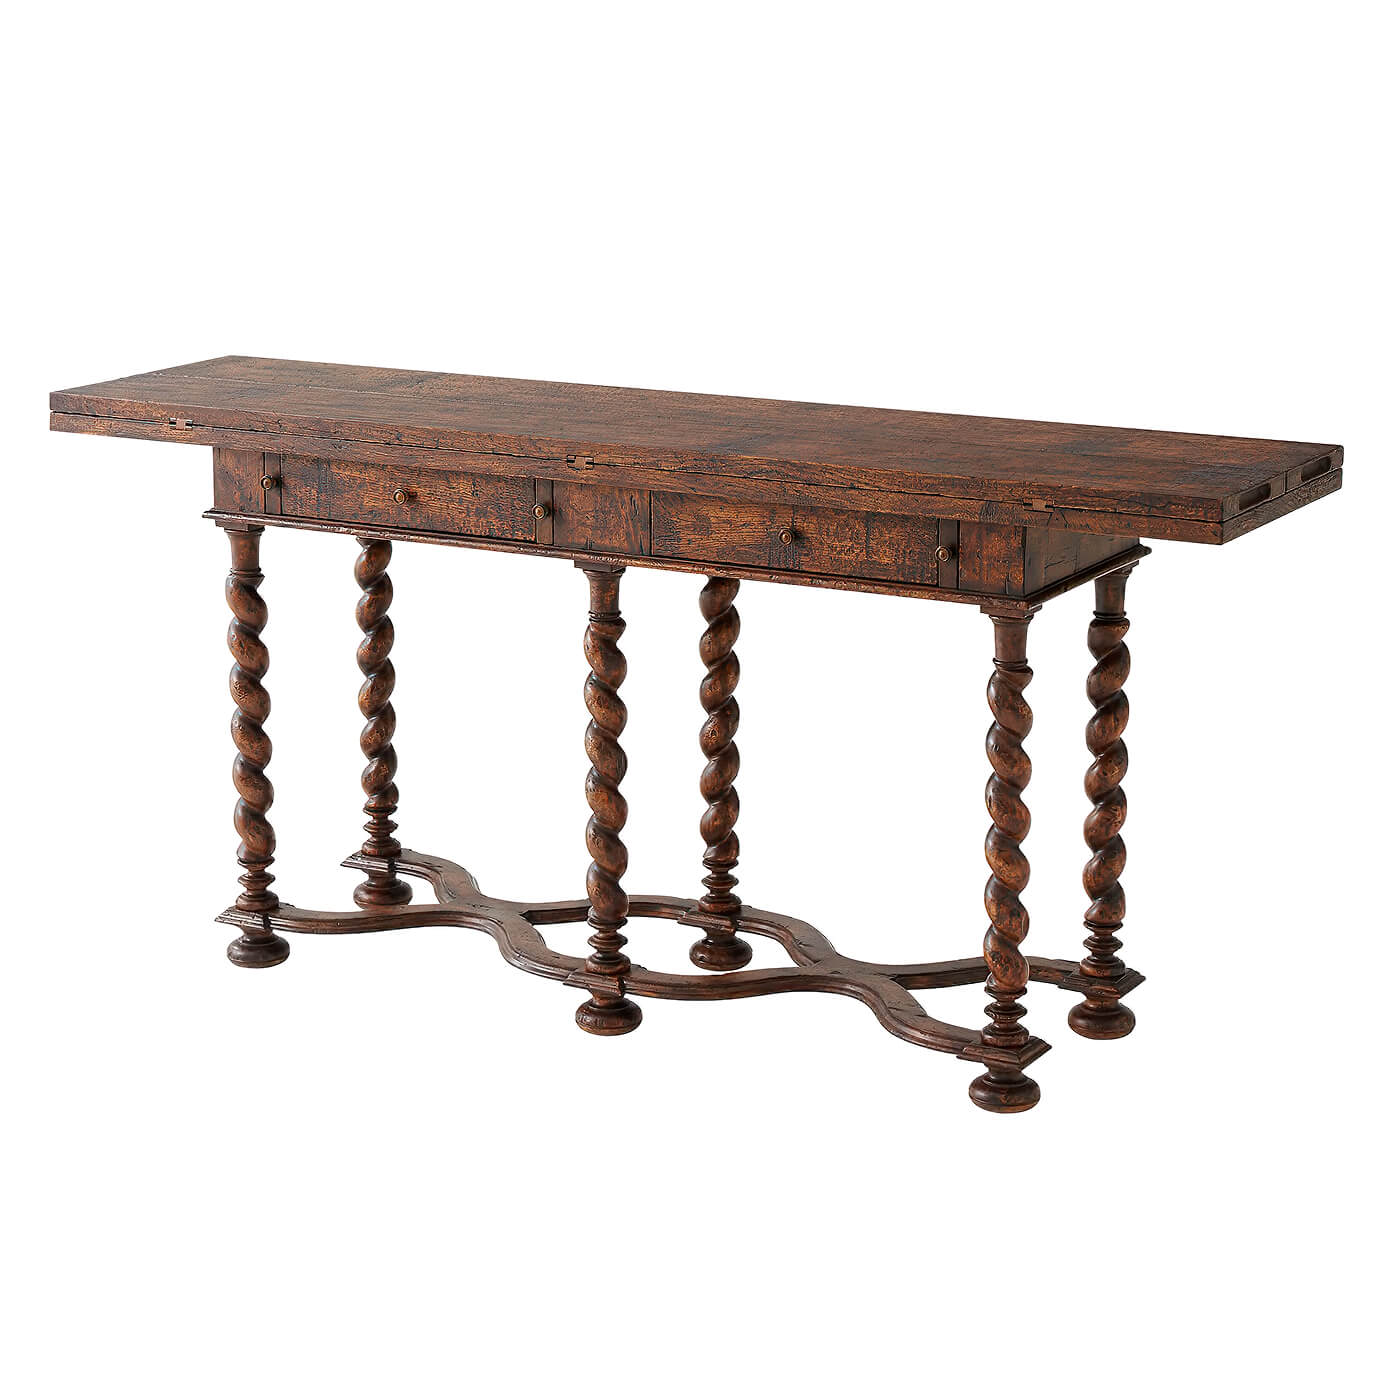 William and Mary Library Hunt Table - English Georgian America